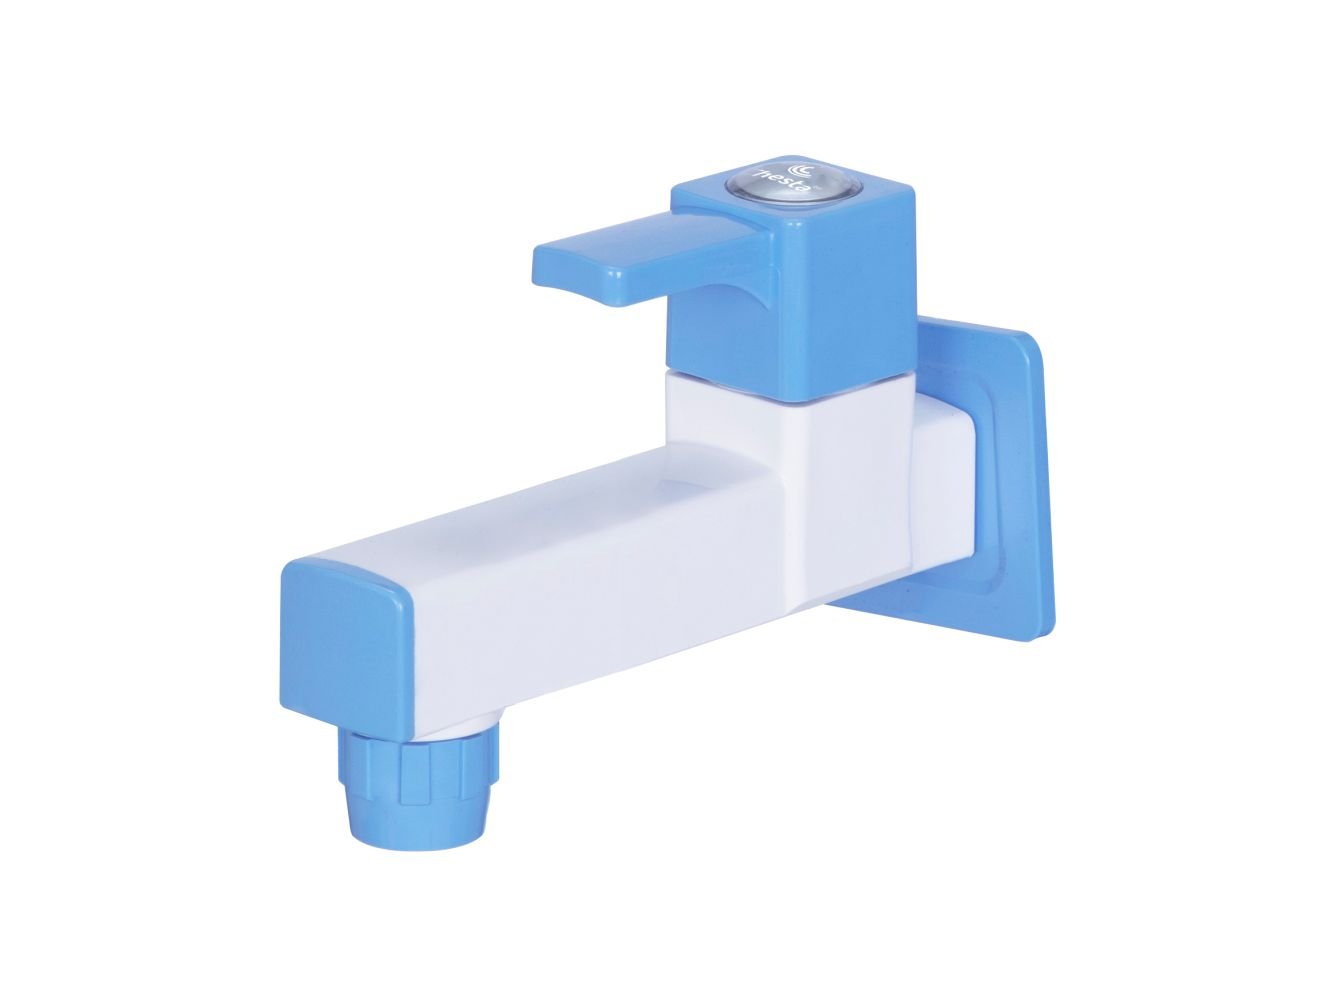 MR-1002 - Long Body With Wall Flange at Chesta Bath Fittings